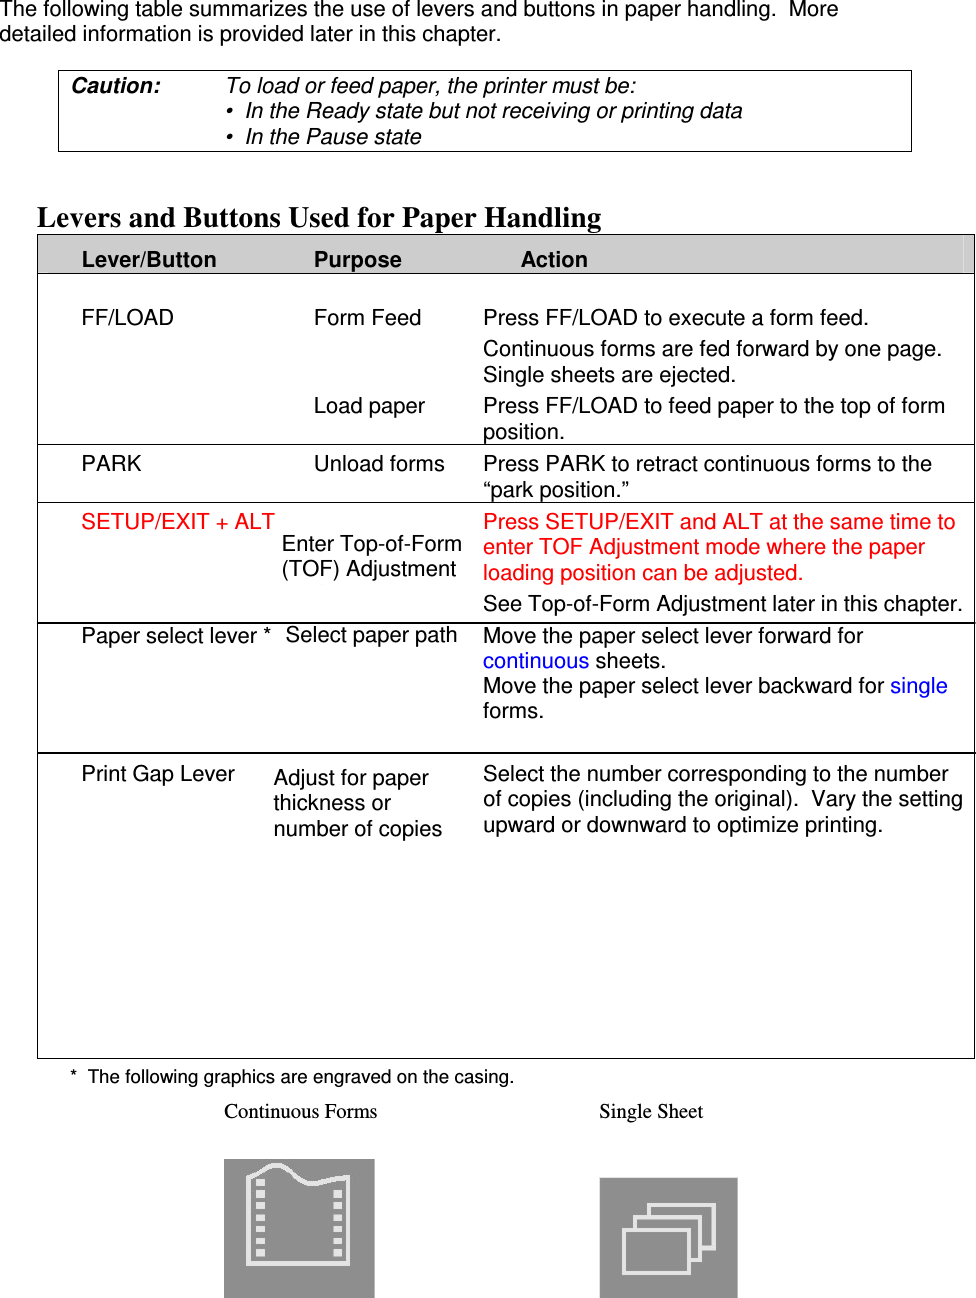 The following table summarizes the use of levers and buttons in paper handling.  More detailed information is provided later in this chapter.  Caution:  To load or feed paper, the printer must be: •  In the Ready state but not receiving or printing data •  In the Pause state  Levers and Buttons Used for Paper Handling Lever/Button  Purpose  Action  FF/LOAD  Form Feed  Press FF/LOAD to execute a form feed.       Continuous forms are fed forward by one page.  Single sheets are ejected.   Load paper  Press FF/LOAD to feed paper to the top of form position. PARK  Unload forms   Press PARK to retract continuous forms to the “park position.” SETUP/EXIT + ALT    Press SETUP/EXIT and ALT at the same time to enter TOF Adjustment mode where the paper loading position can be adjusted.     See Top-of-Form Adjustment later in this chapter. Paper select lever *    Move the paper select lever forward for continuous sheets. Move the paper select lever backward for single forms.  Print Gap Lever    Select the number corresponding to the number of copies (including the original).  Vary the setting upward or downward to optimize printing. *  The following graphics are engraved on the casing.          Continuous Forms      Single Sheet              Enter Top-of-Form (TOF) Adjustment mode Adjust for paper thickness or number of copies   Select paper path 